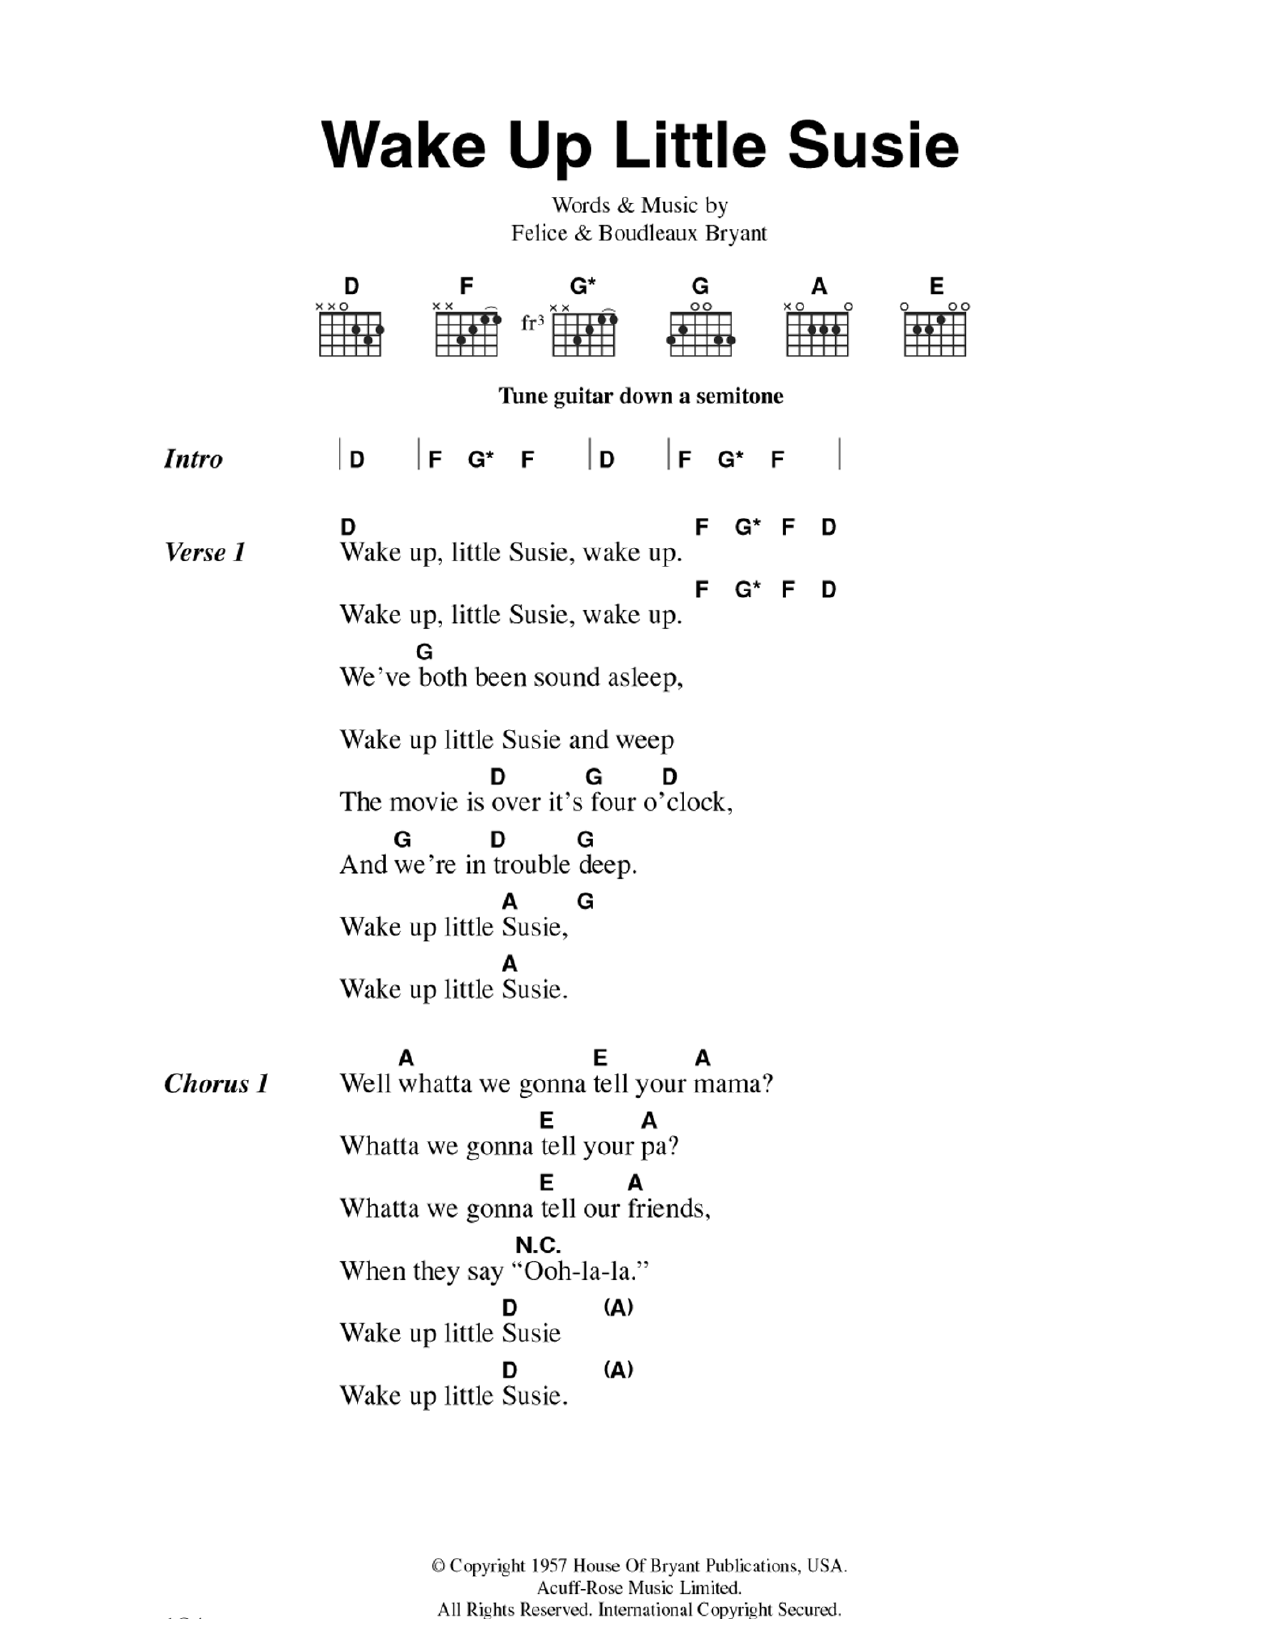 Download The Everly Brothers Wake Up Little Susie Sheet Music